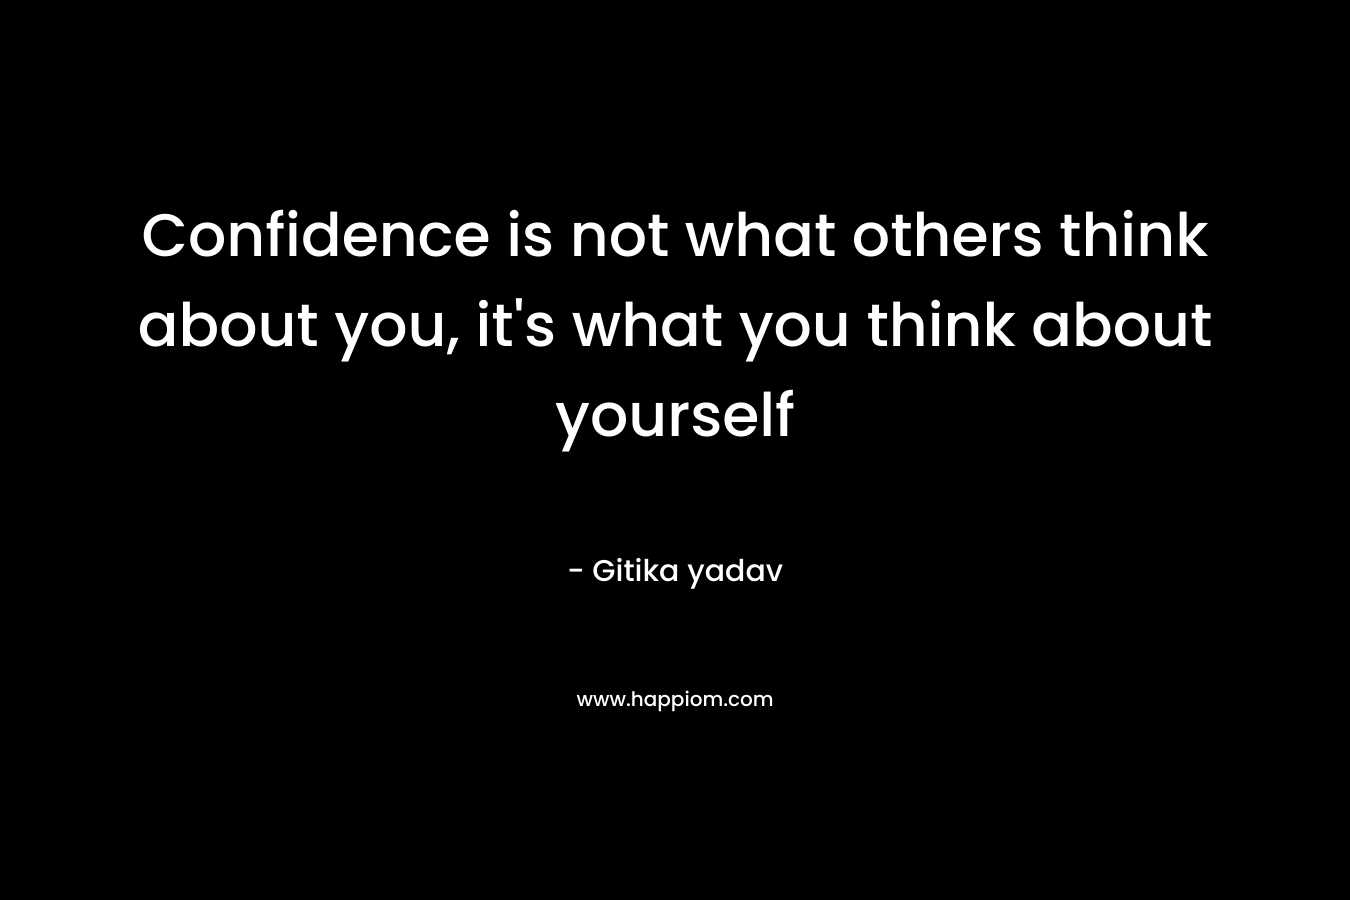 Confidence is not what others think about you, it’s what you think about yourself – Gitika yadav